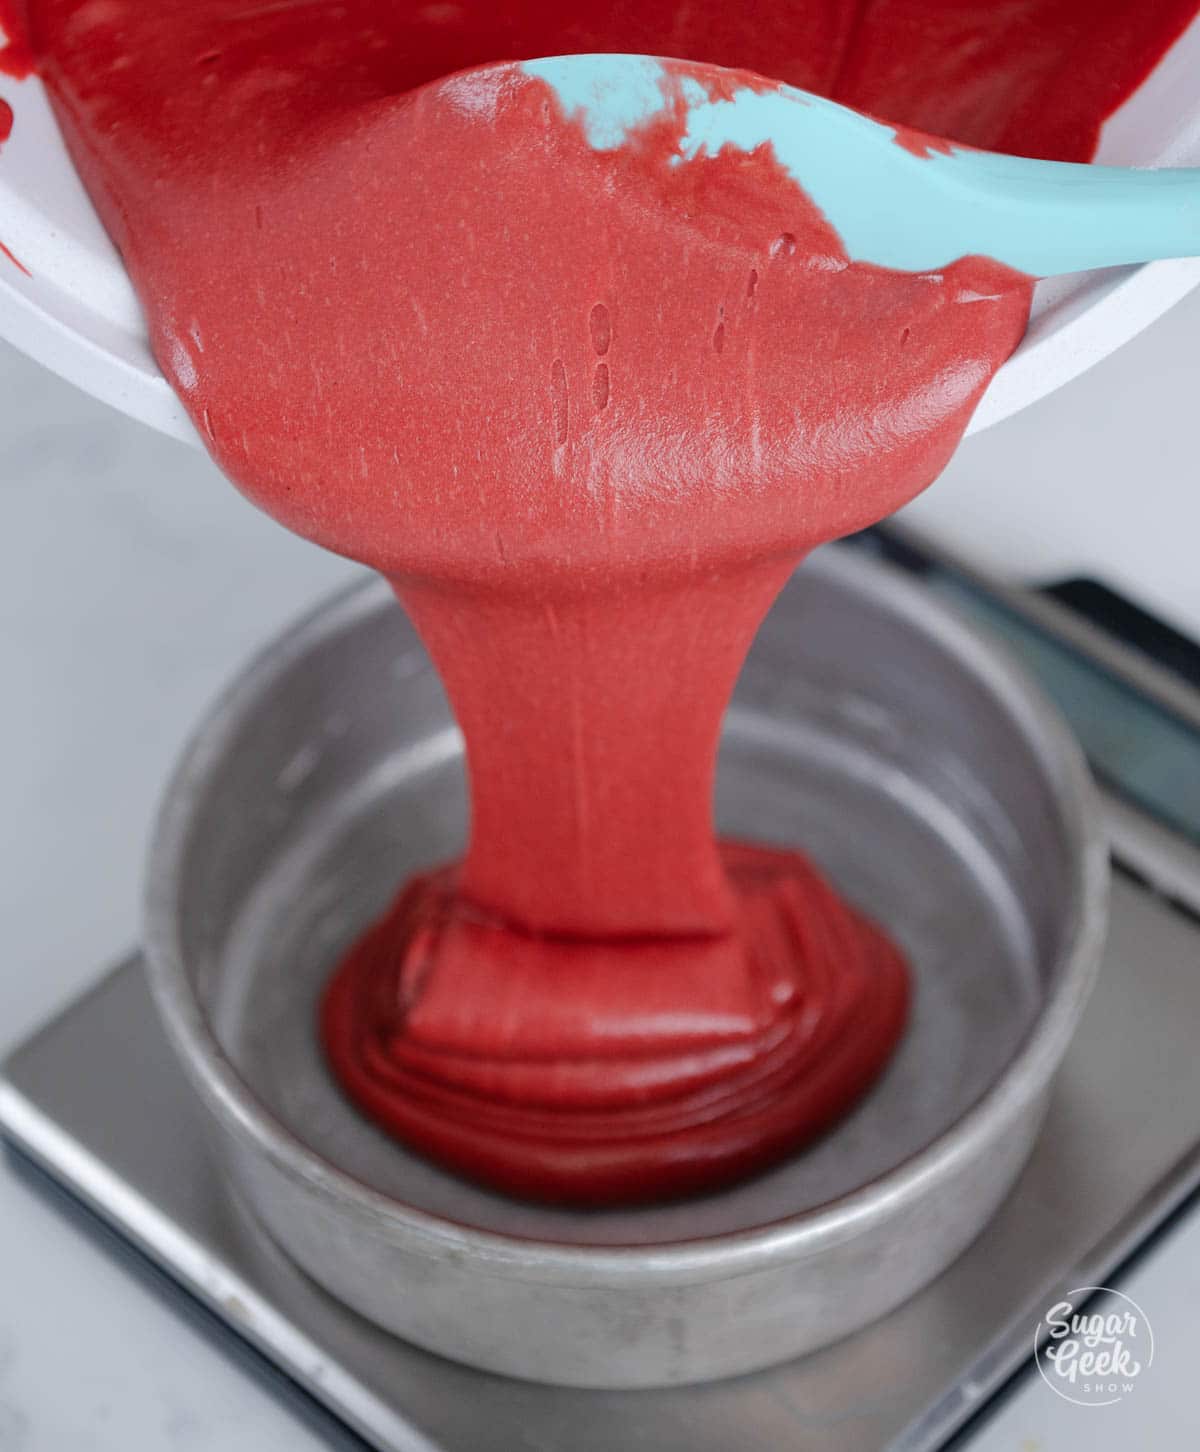 Pouring finished red velvet cake batter into a cake pan.